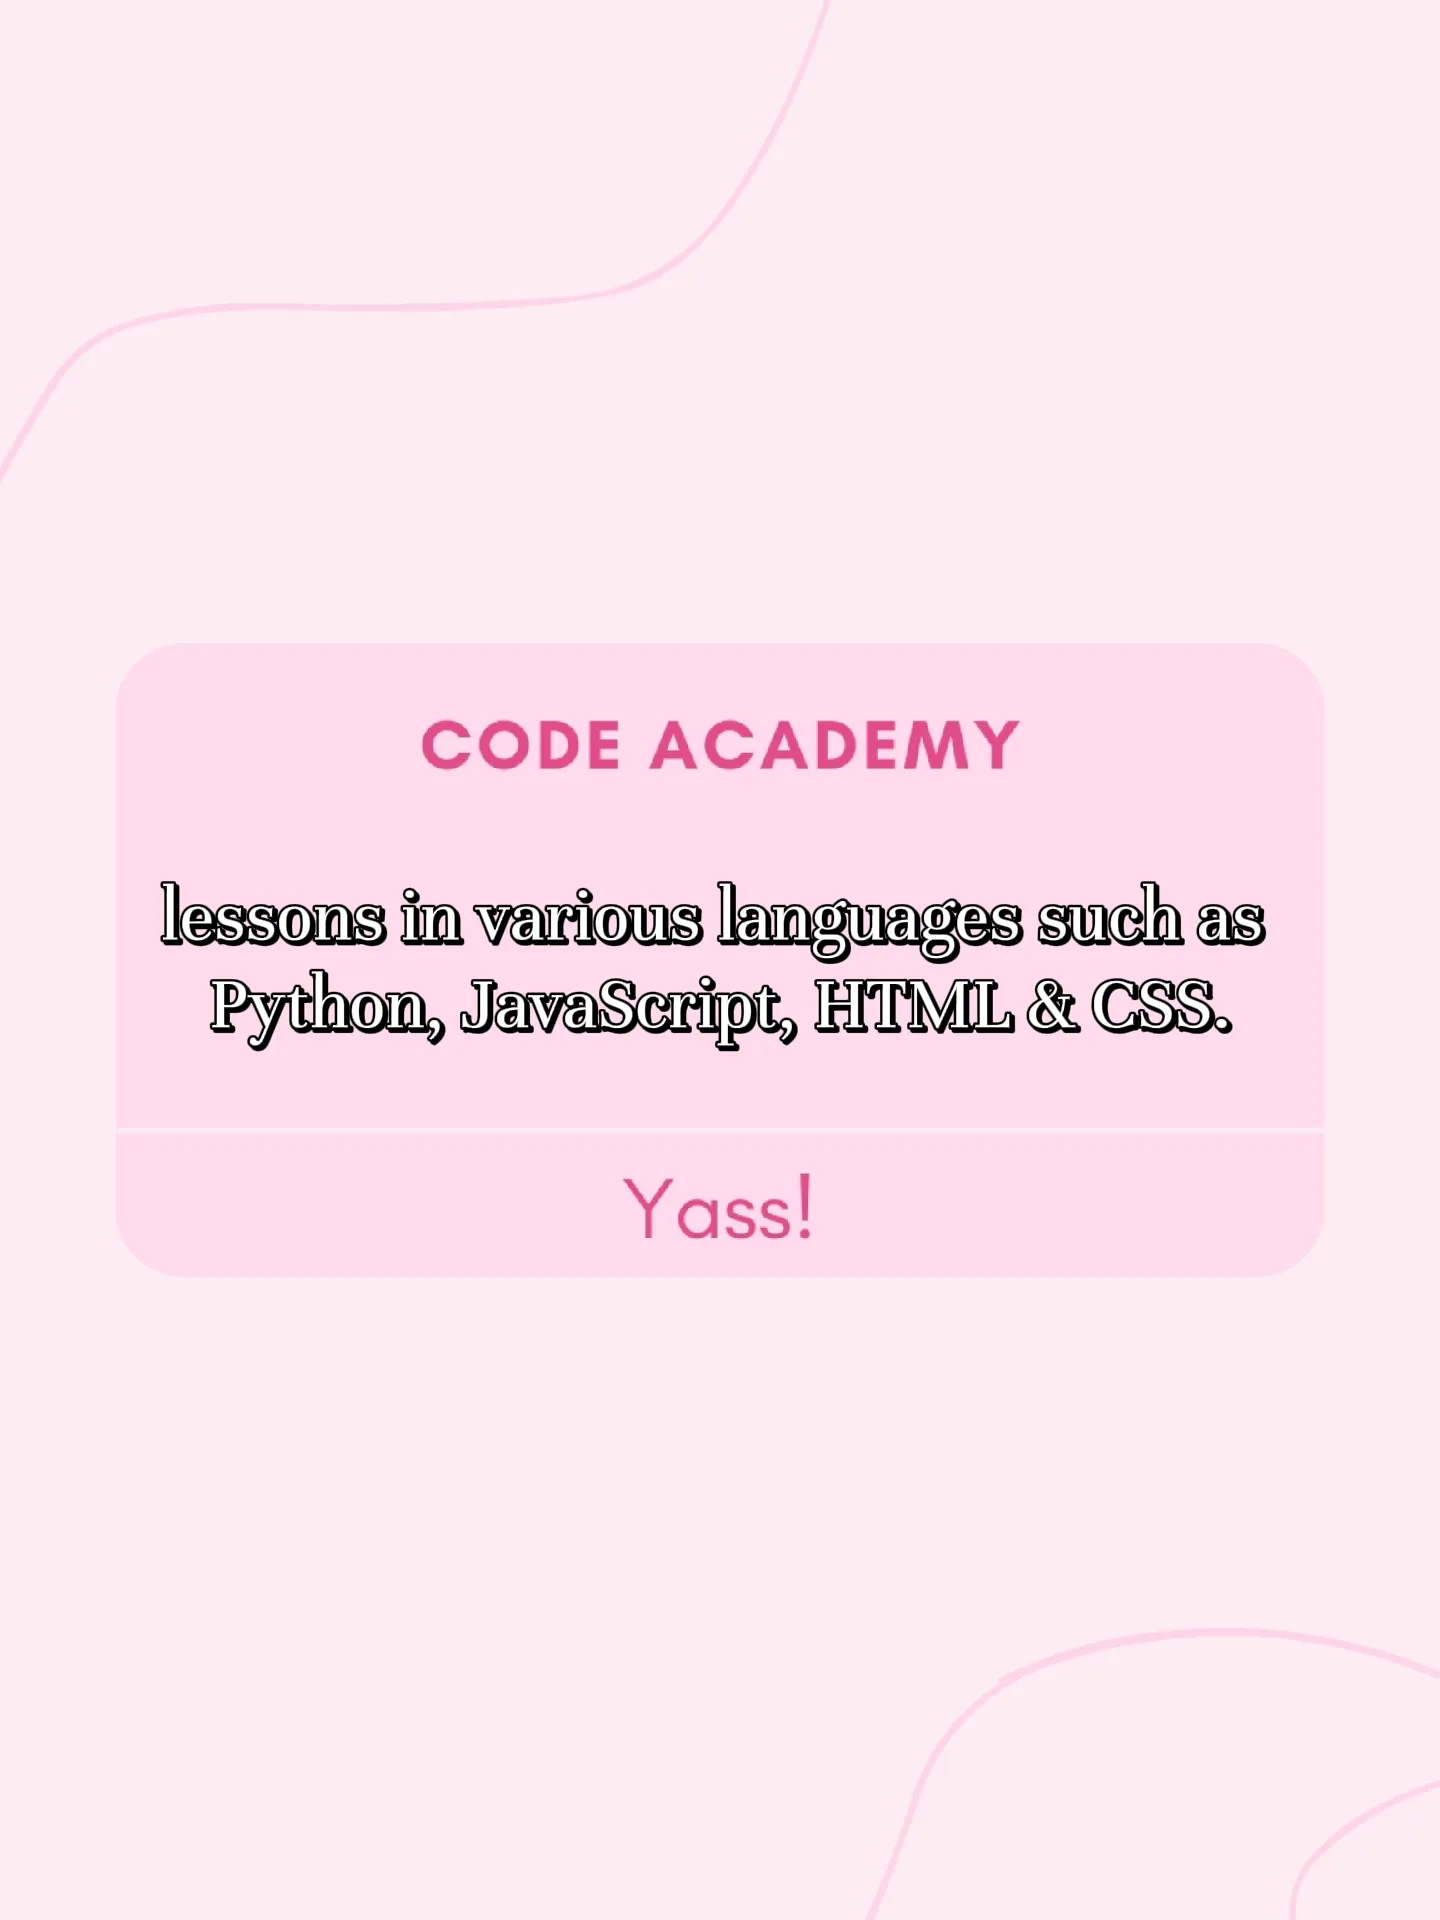  A white background with a pink text that says "Code Academy".